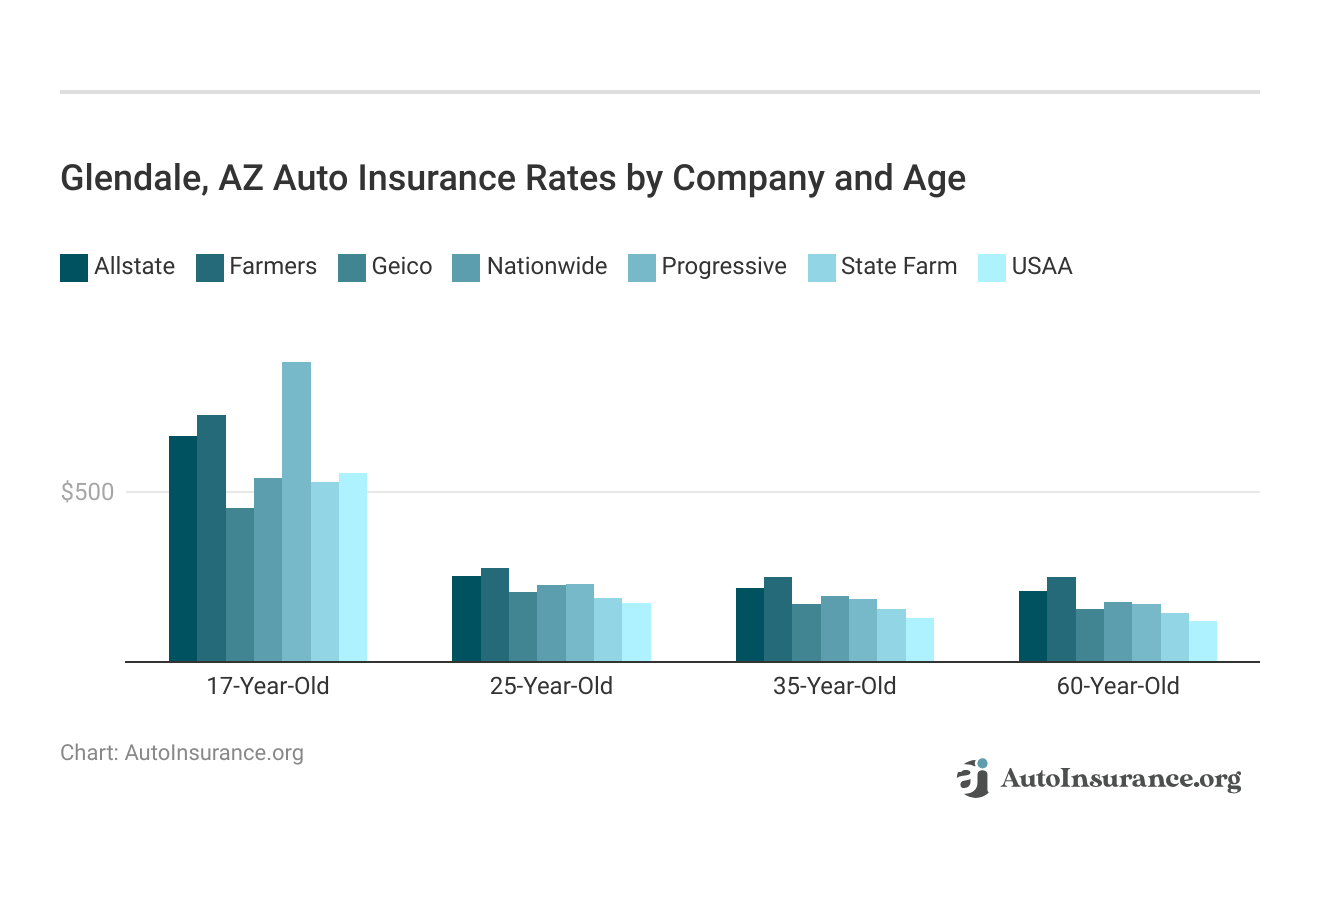 <h3>Glendale, AZ Auto Insurance Rates by Company and Age</h3>